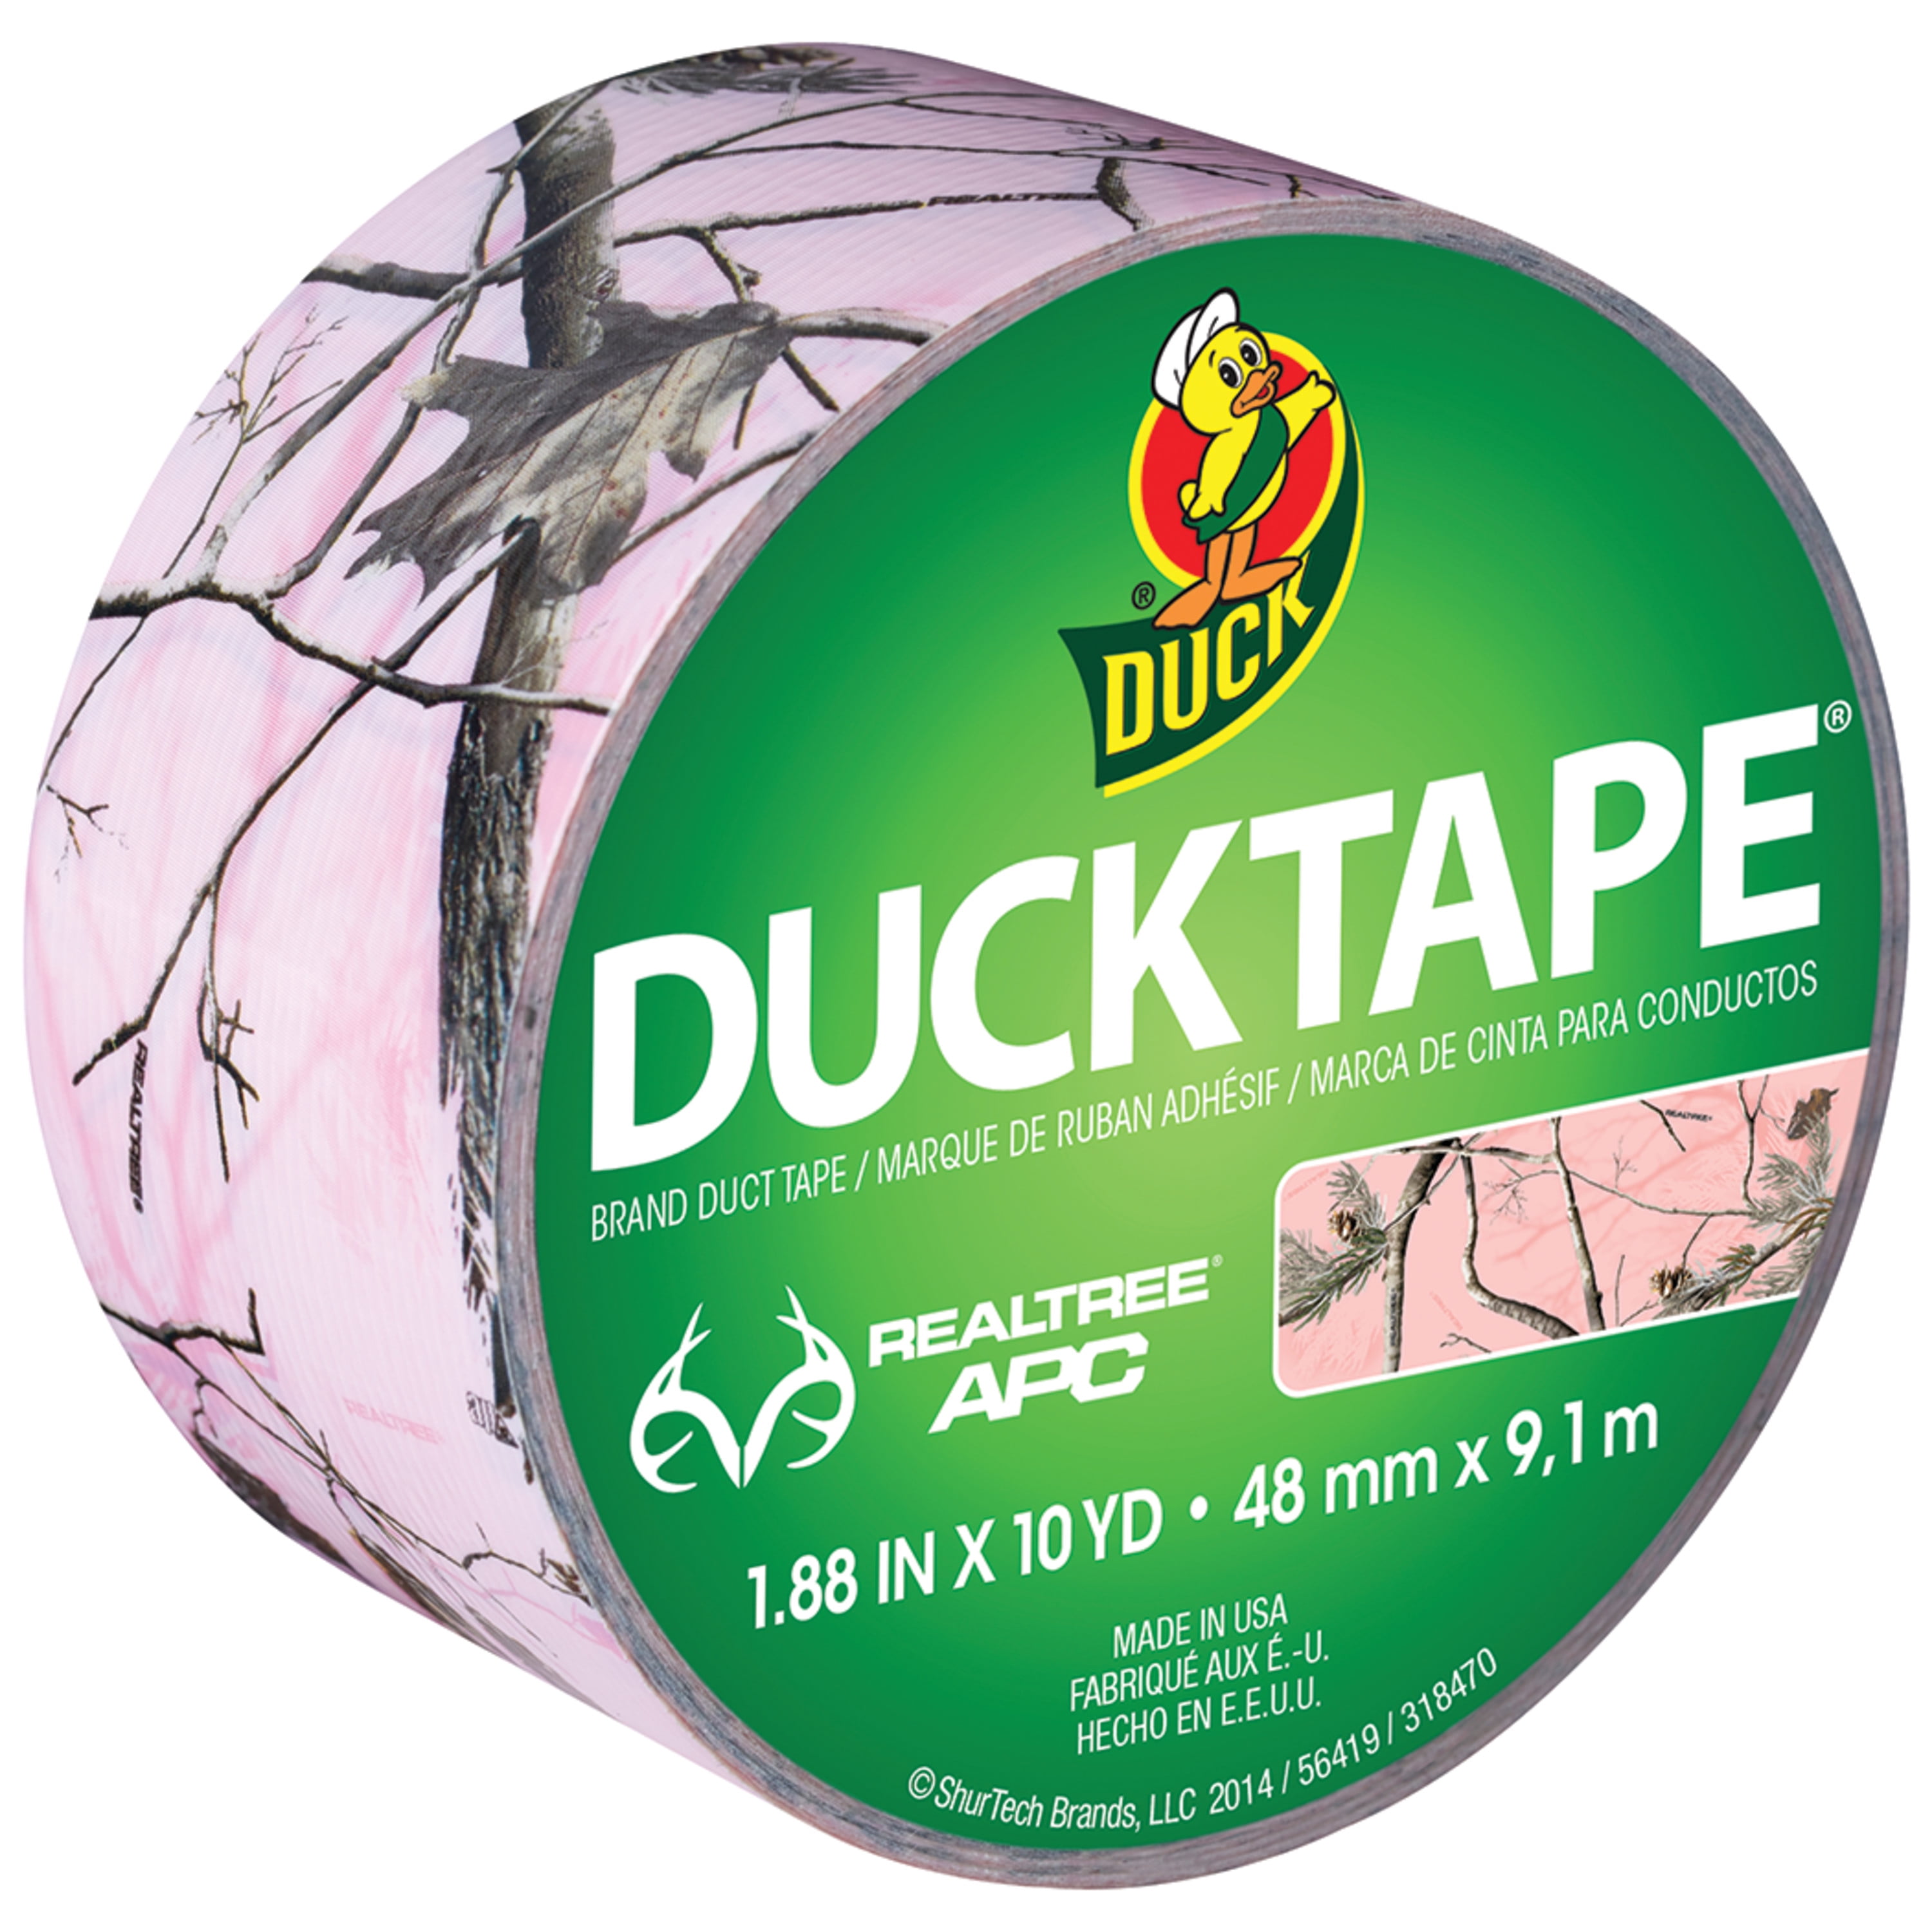 Duck Brand 1409574 Printed Duct Tape 1.88 Inches x 10 Yard Realtree Camouflage 